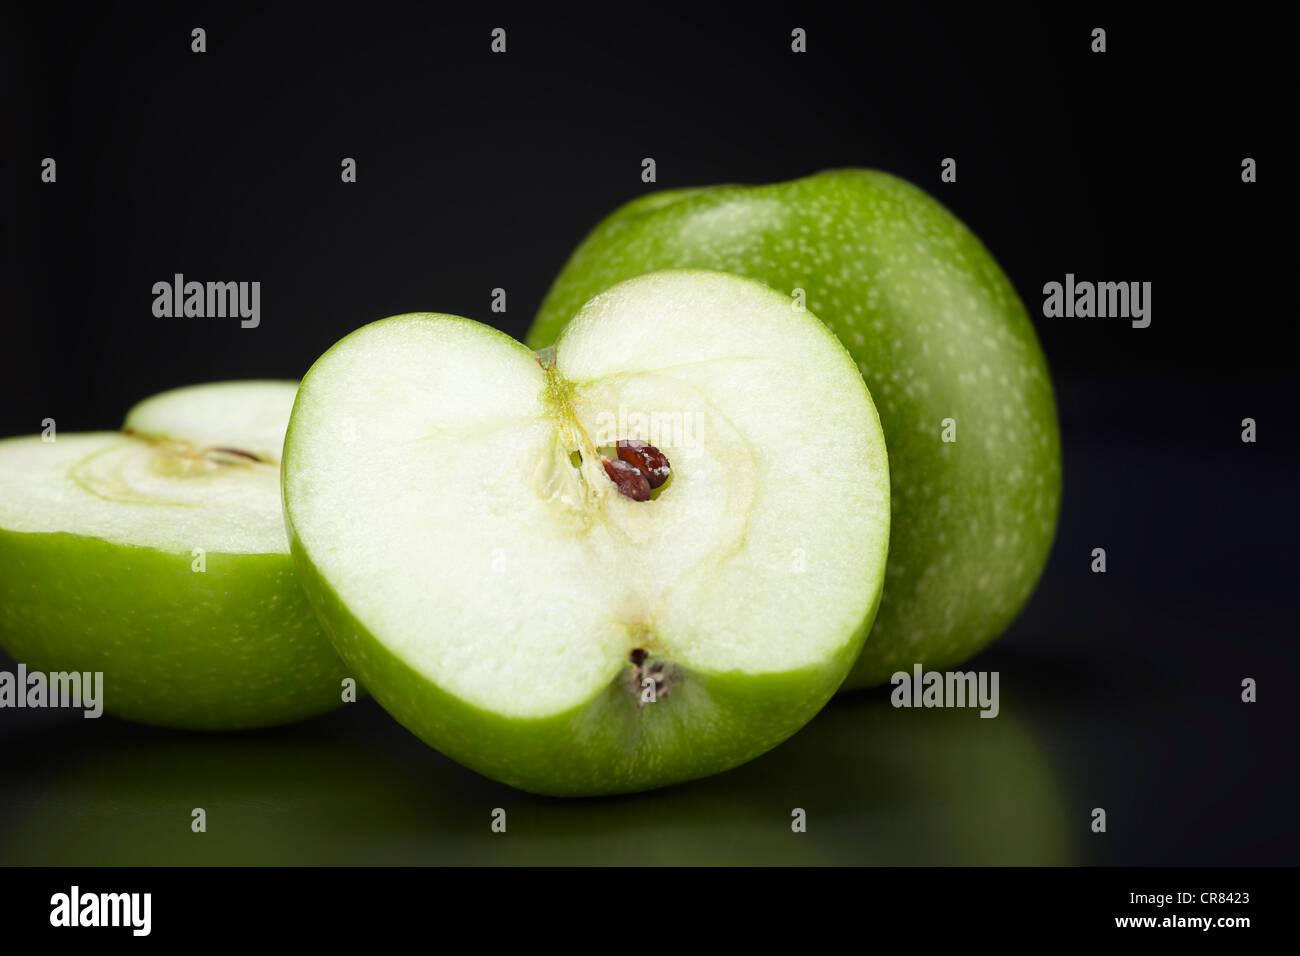 Two green Granny Smith apples, one whole apple and one apple cut in half, on black glass plate Stock Photo